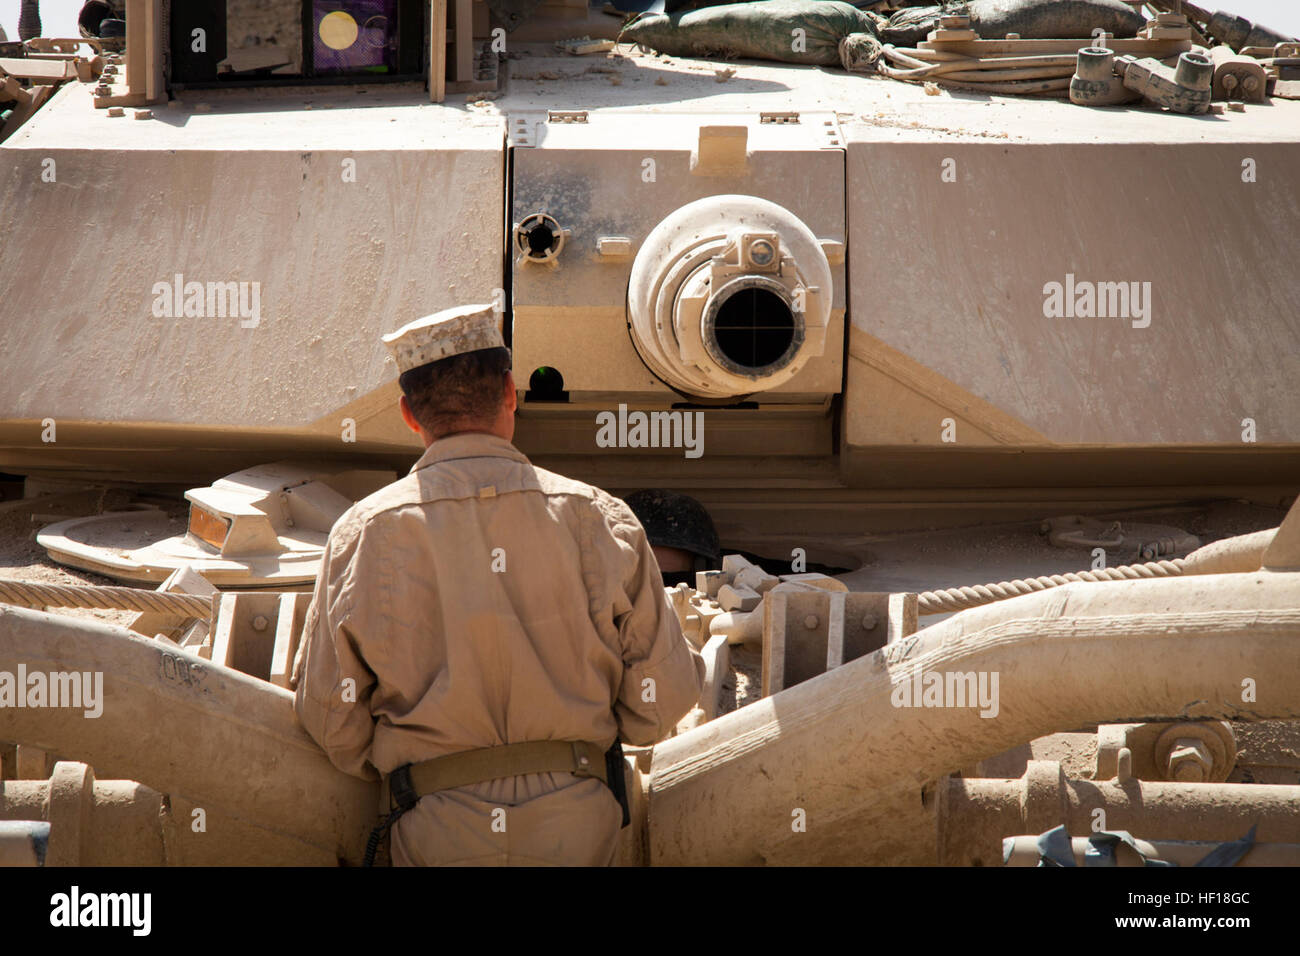 U.S. Marine Corps Staff Sgt. Paul Acevedo, a section leader from Pomona, Calif., assigned to Delta Company, 1st Tank Battalion, Regimental Combat Team 7, (RCT) 7, conducts function checks on an M1A1 Abrams tank on Camp Shir Ghazay, Helmand province, Afghanistan, April 27, 2013. Acevedo alongside the Marines and Sailors of Delta Company deployed to Afghanistan in support of Operation Enduring Freedom. (U.S. Marine Corps photo by Staff Sgt. Ezekiel R. Kitandwe/Released) Delta Company tanks roll through Shir Ghazay 130427-M-RO295-074 Stock Photo